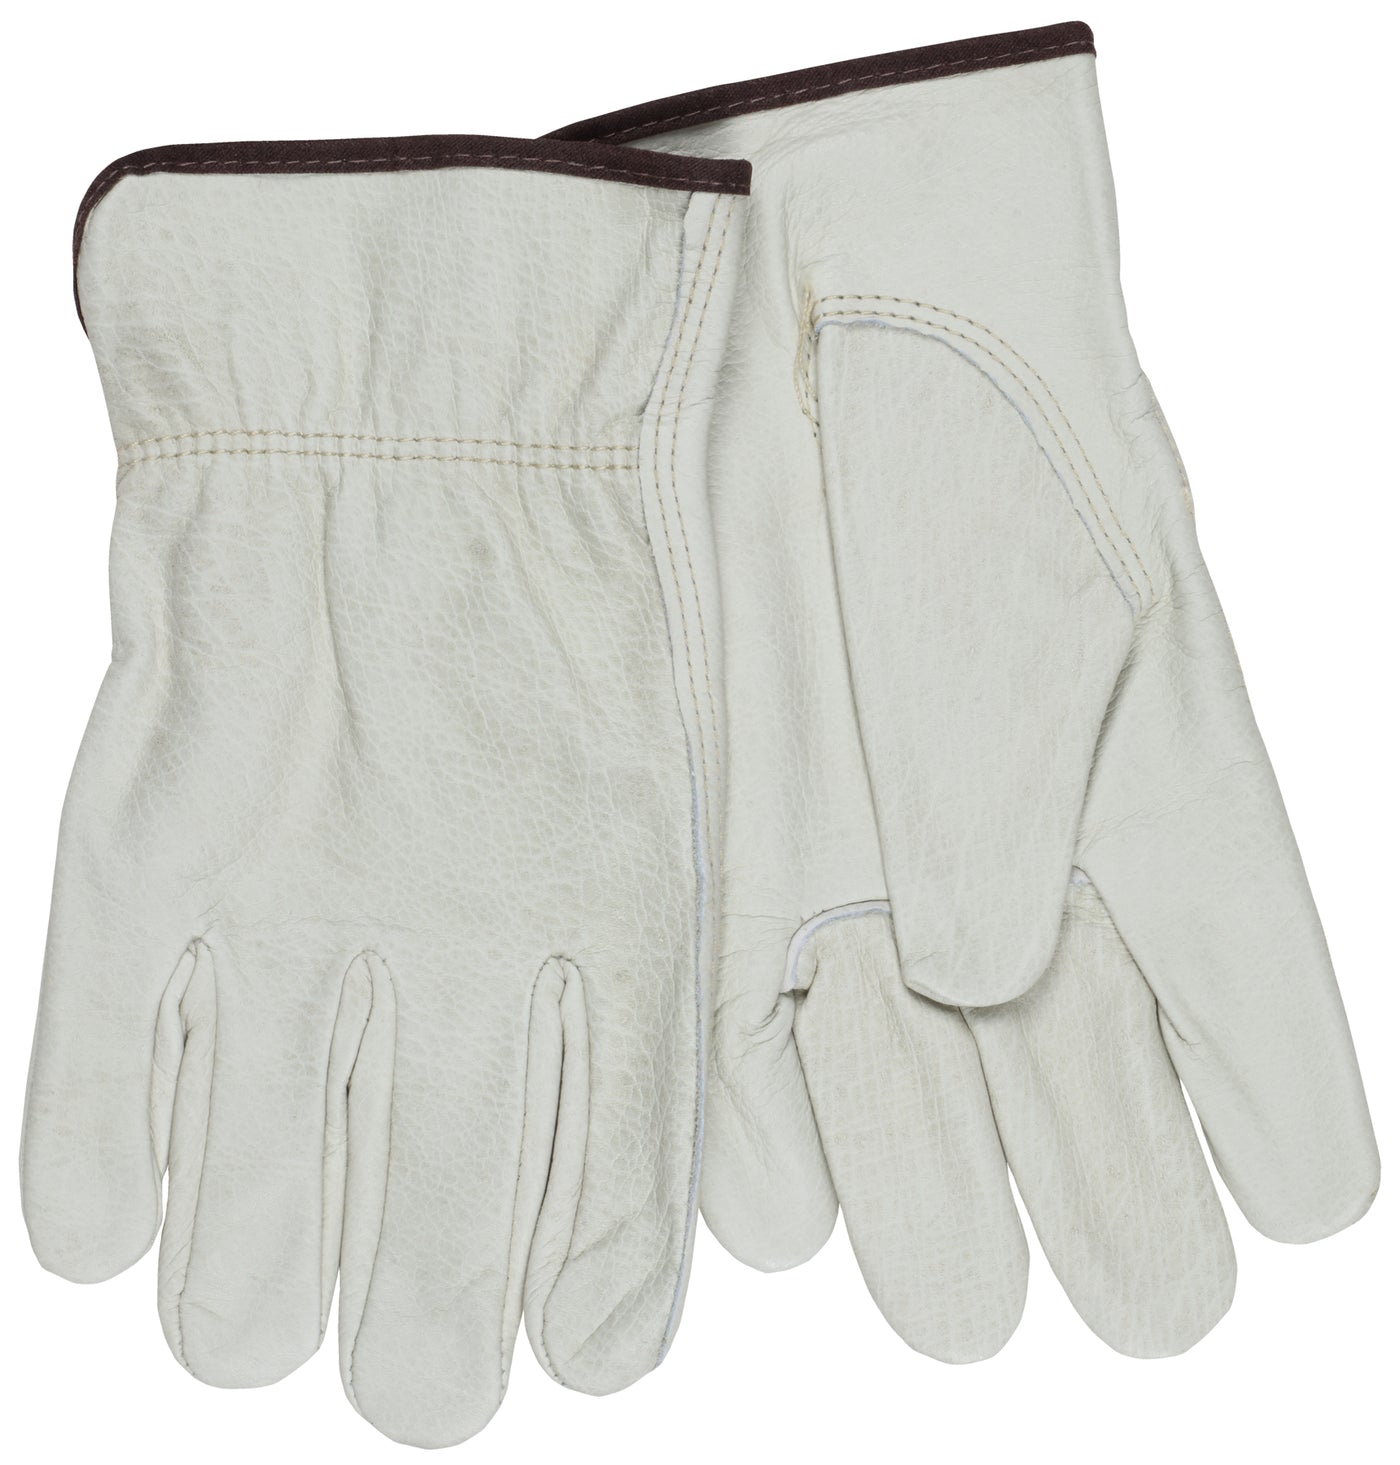 3215 - Leather Drivers Work Gloves